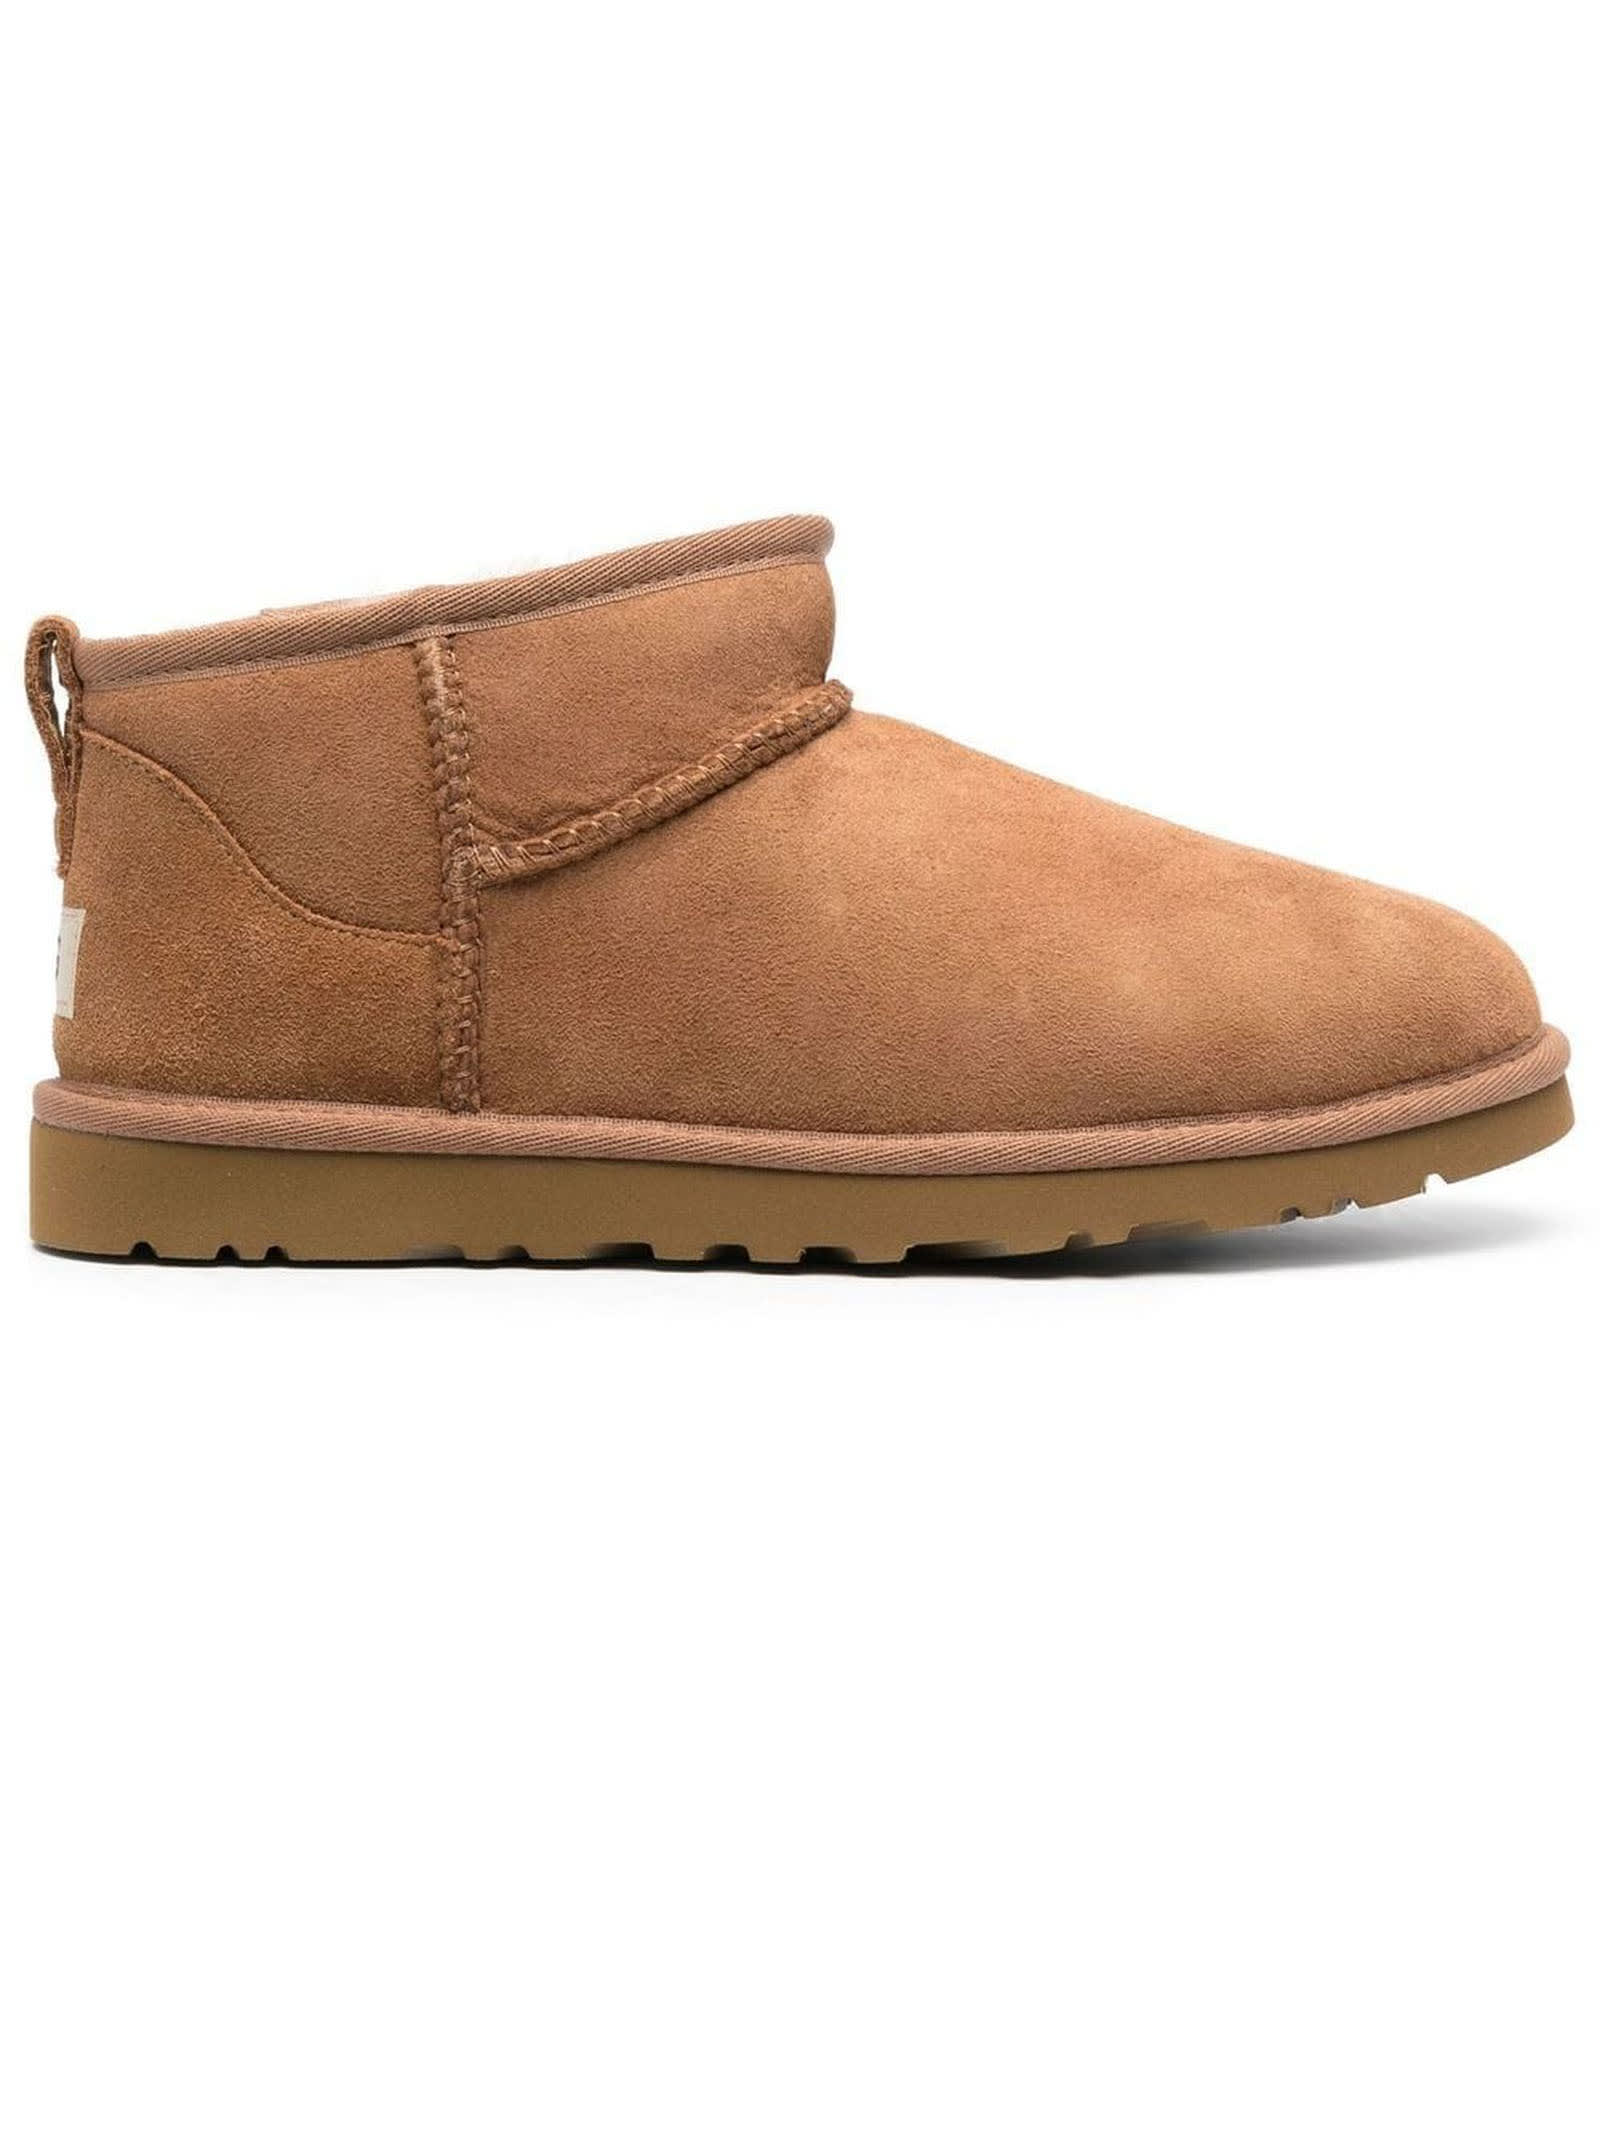 UGG CAMEL BROWN ULTRA MINI SUEDE BOOTS